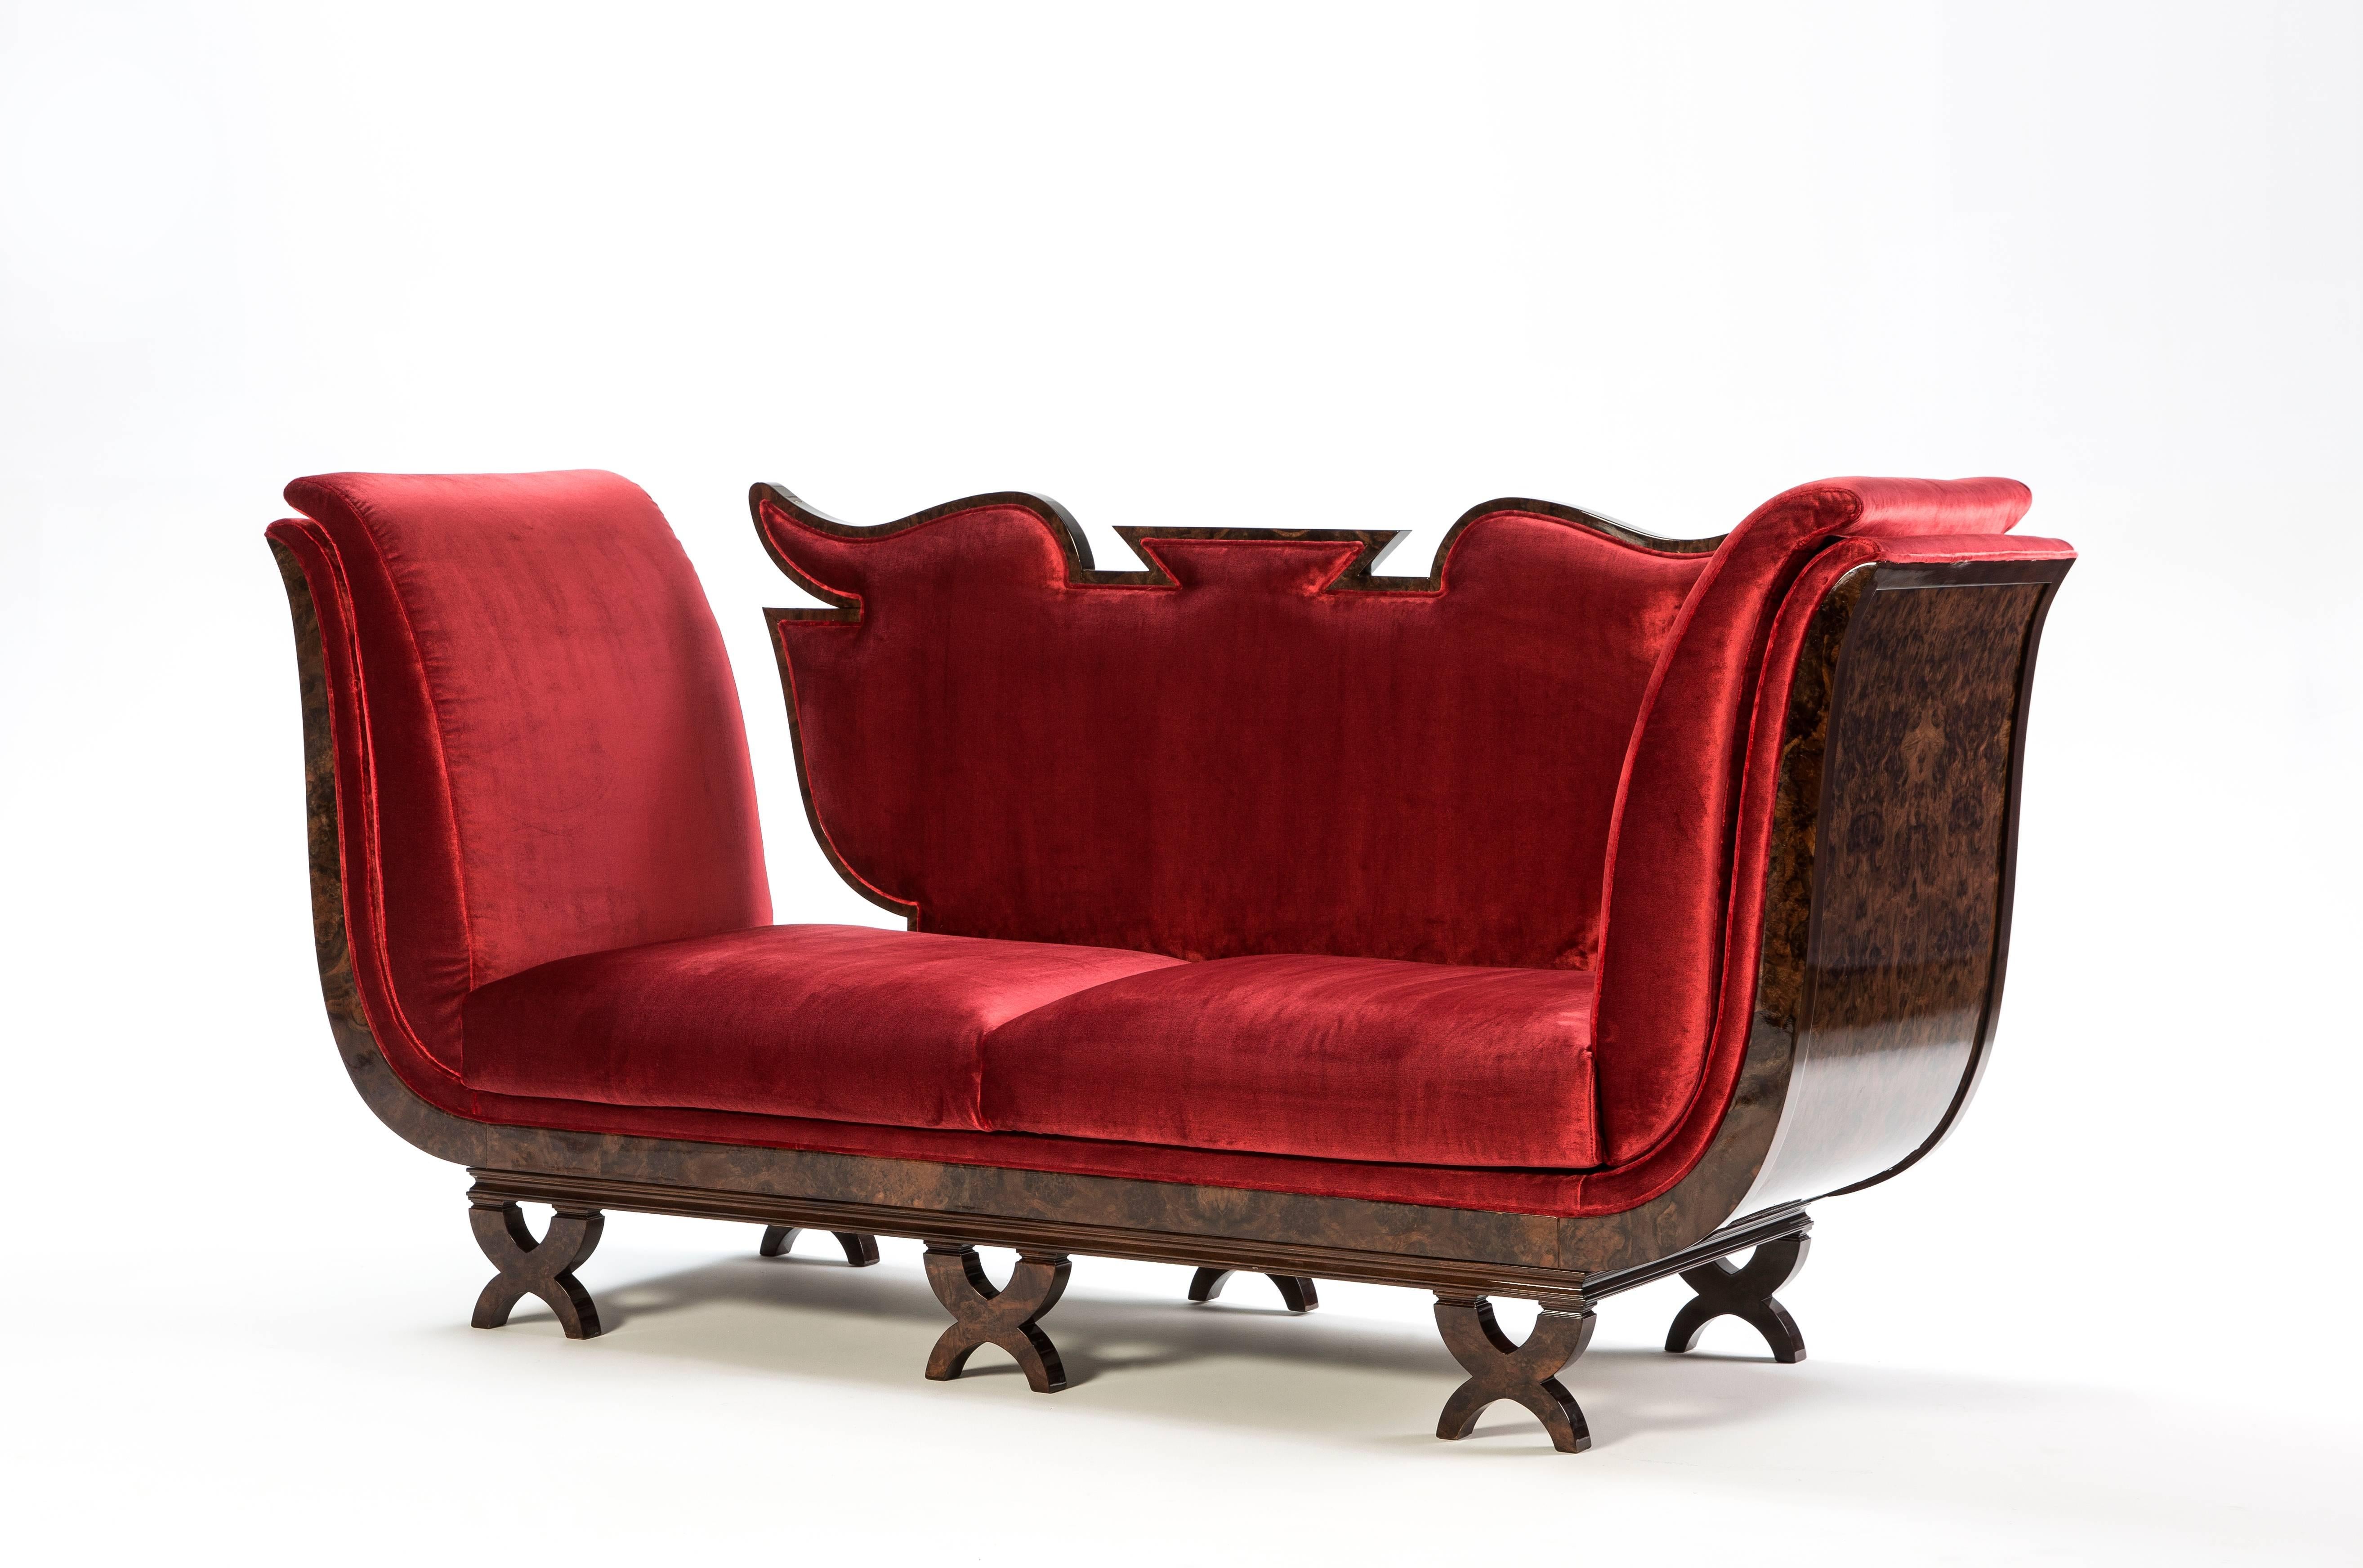 Caterina Licitra (Ponti) "Tributo A Gio Ponti" Candy sofa. A showpiece designed by Caterina Licitra the great granddaughter to Gio Ponti. Crafted by Mariner Furniture Family in walnut burl covered in Dedar Milano collection 